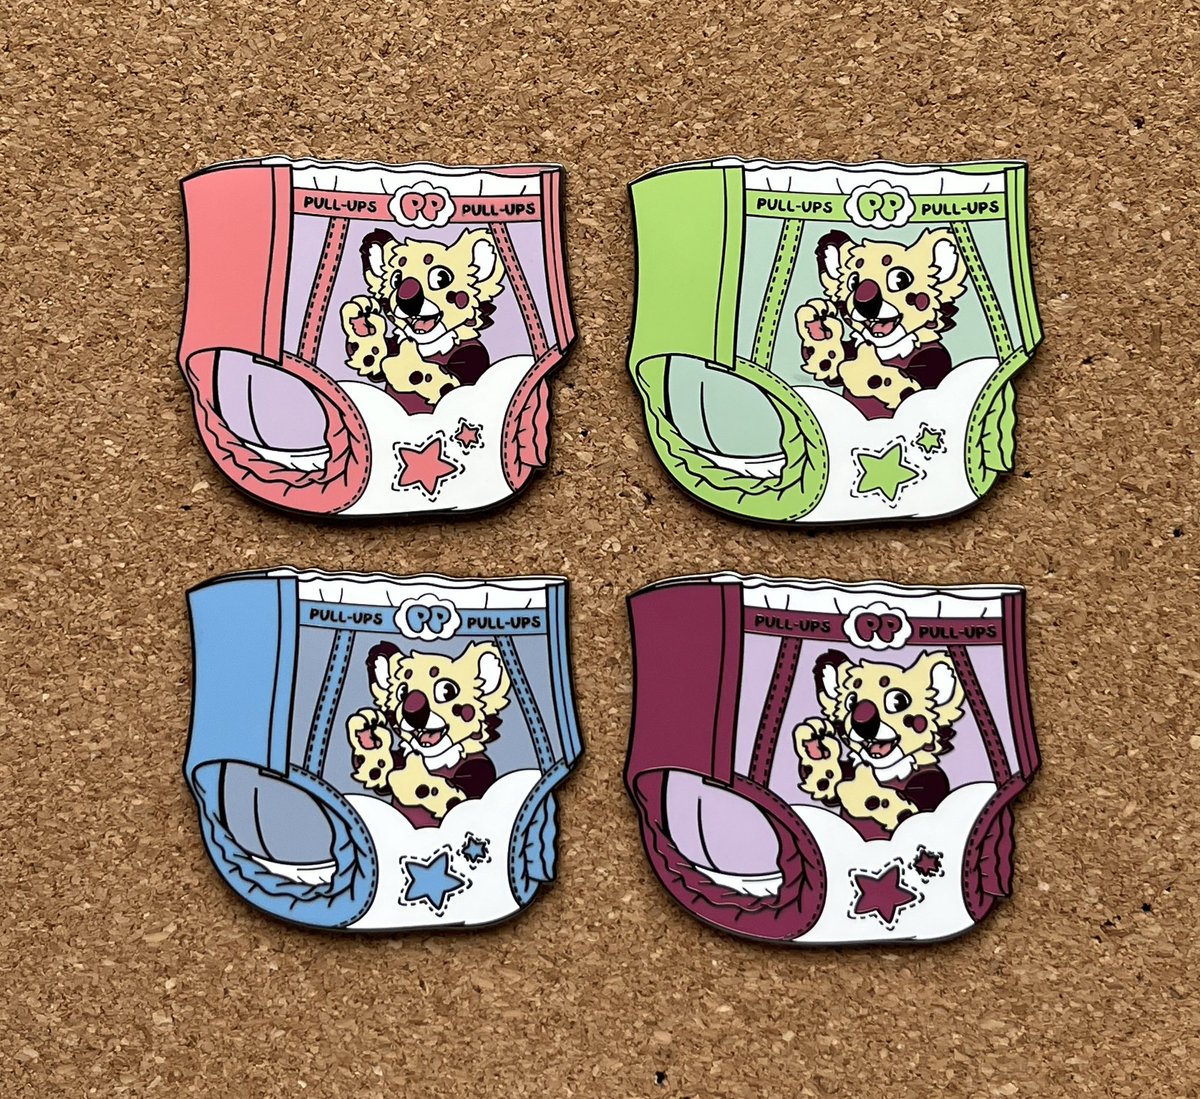 You're quite the big kiddo, graduating from diapers to pull-ups! These Koo-alas are here to cheer you on and let you know how much of a big kid you are!

#abdl #poofypins #babyfur #pullups #adultbaby #diaperlover #enamelpins